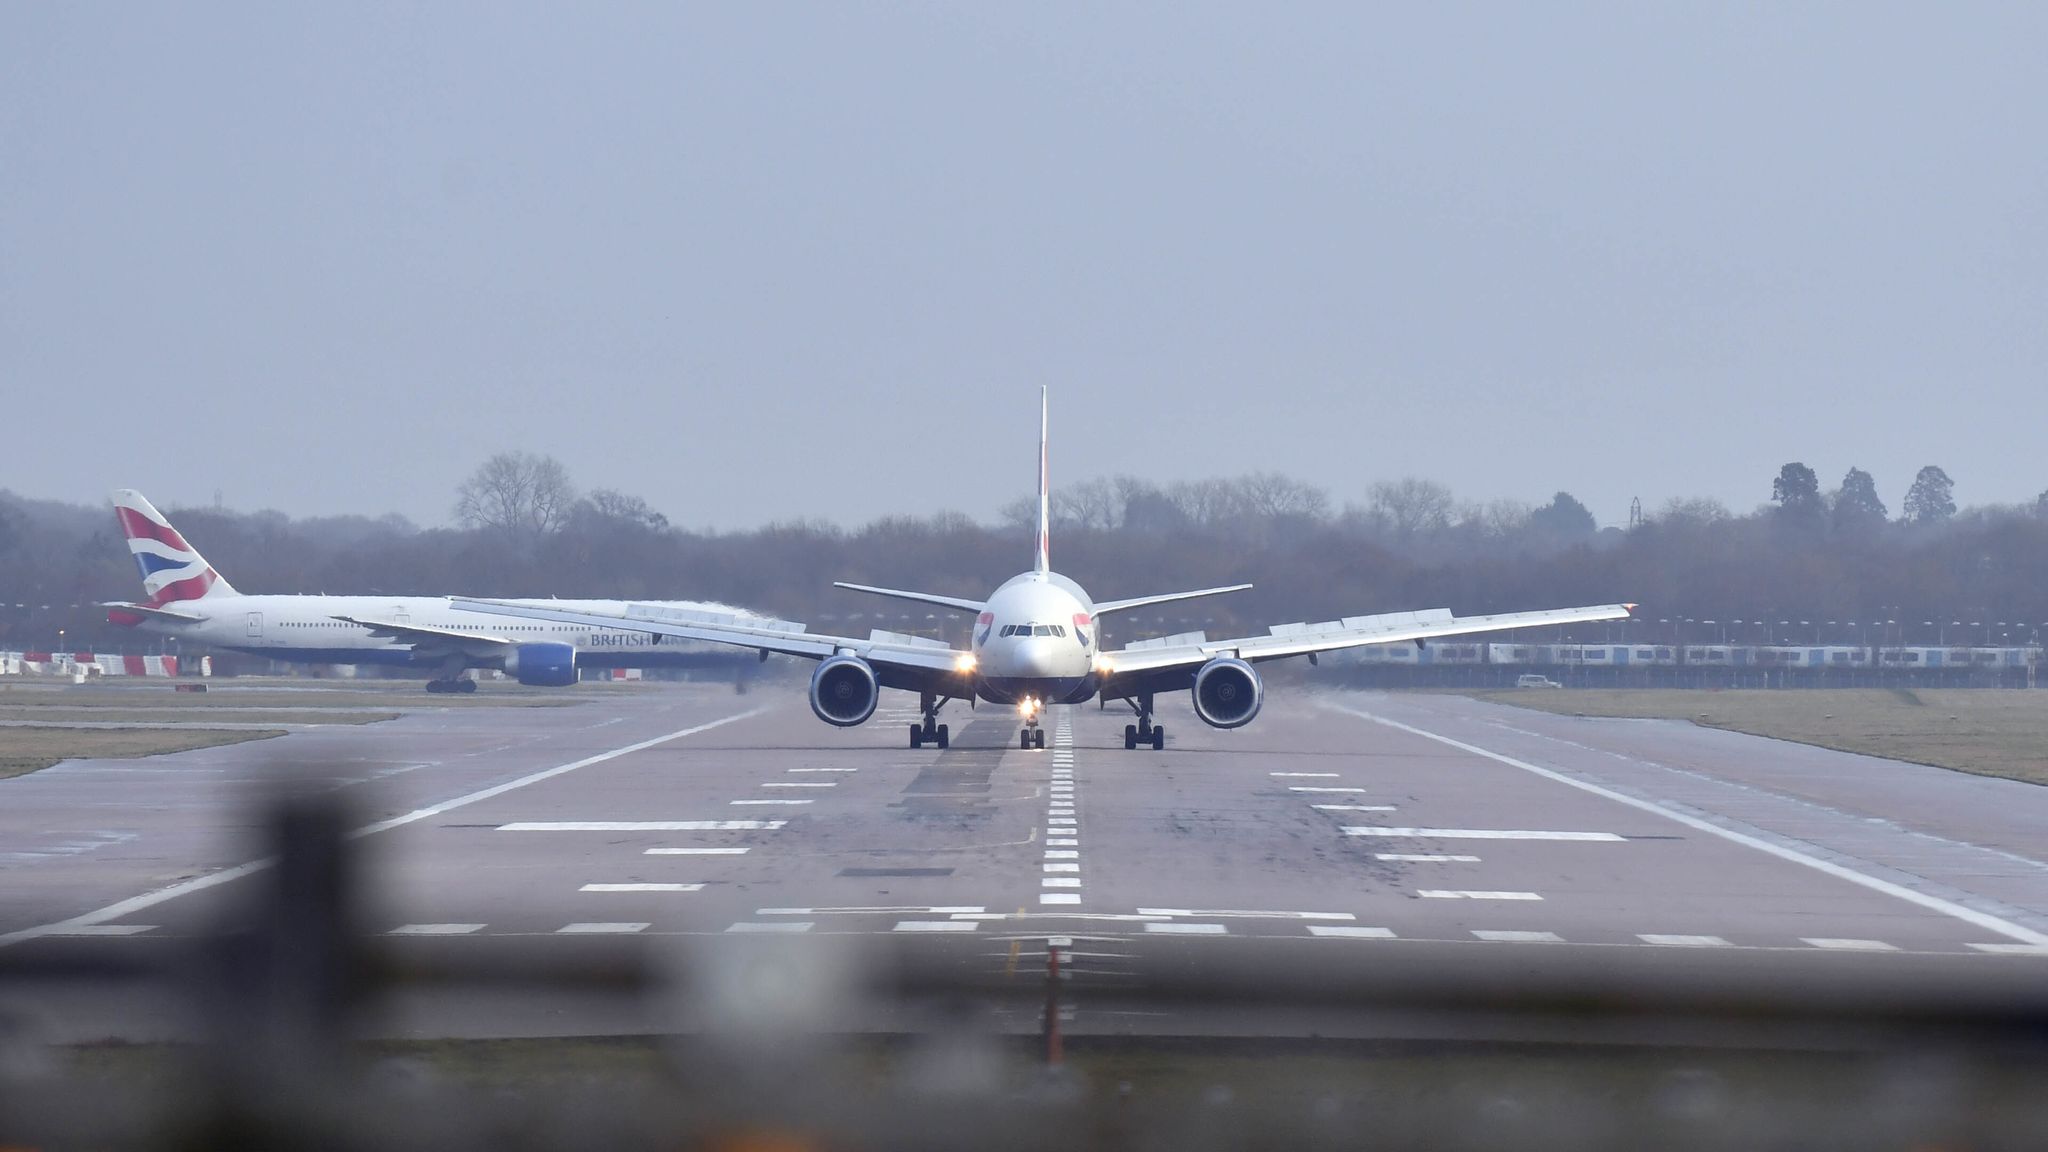 Gatwick Airport flights resumed after 'systems issue' grounded planes